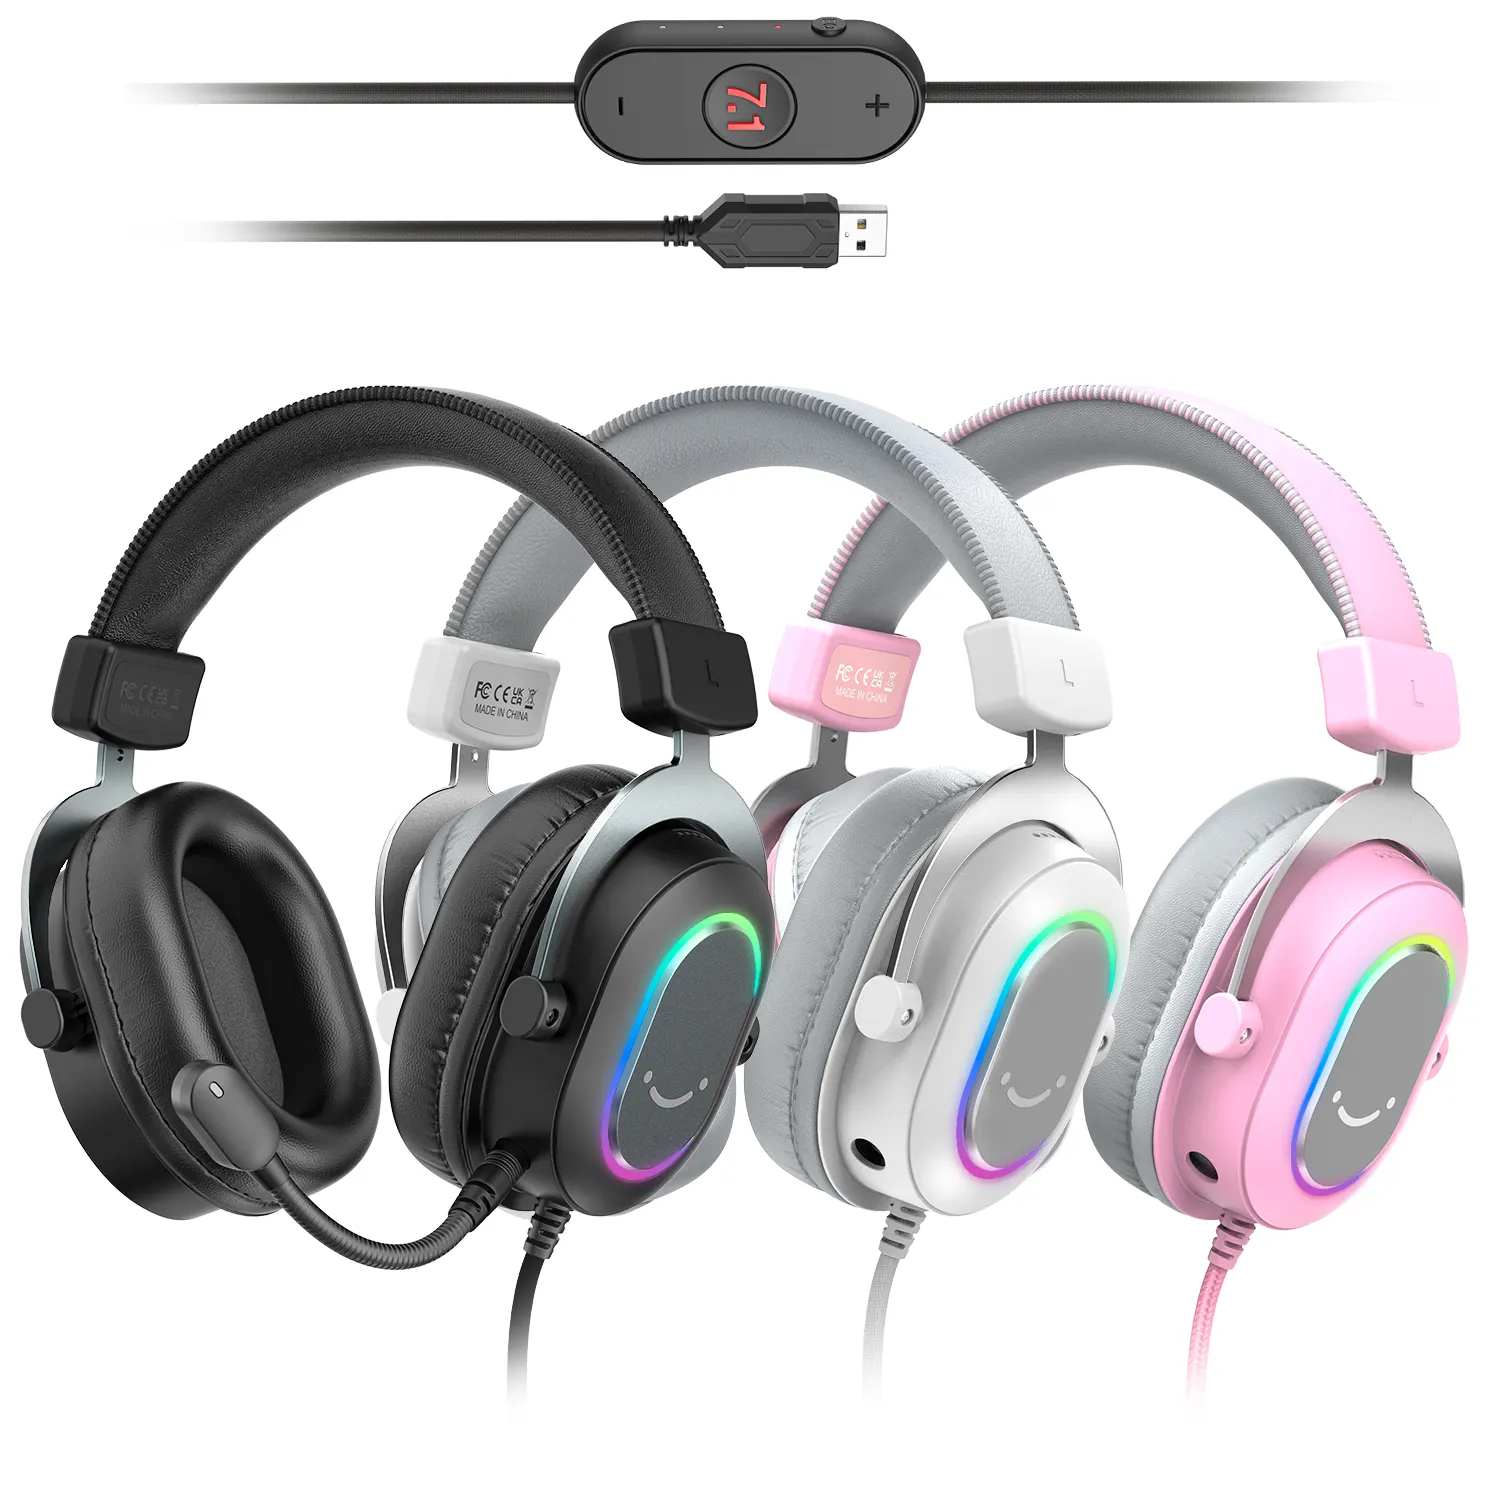 Fifine H6 High Quality 7.1 Surround Sound Gaming Headset RGB Gaming Headphones USB Wired Gamer Headset Gaming Headphones